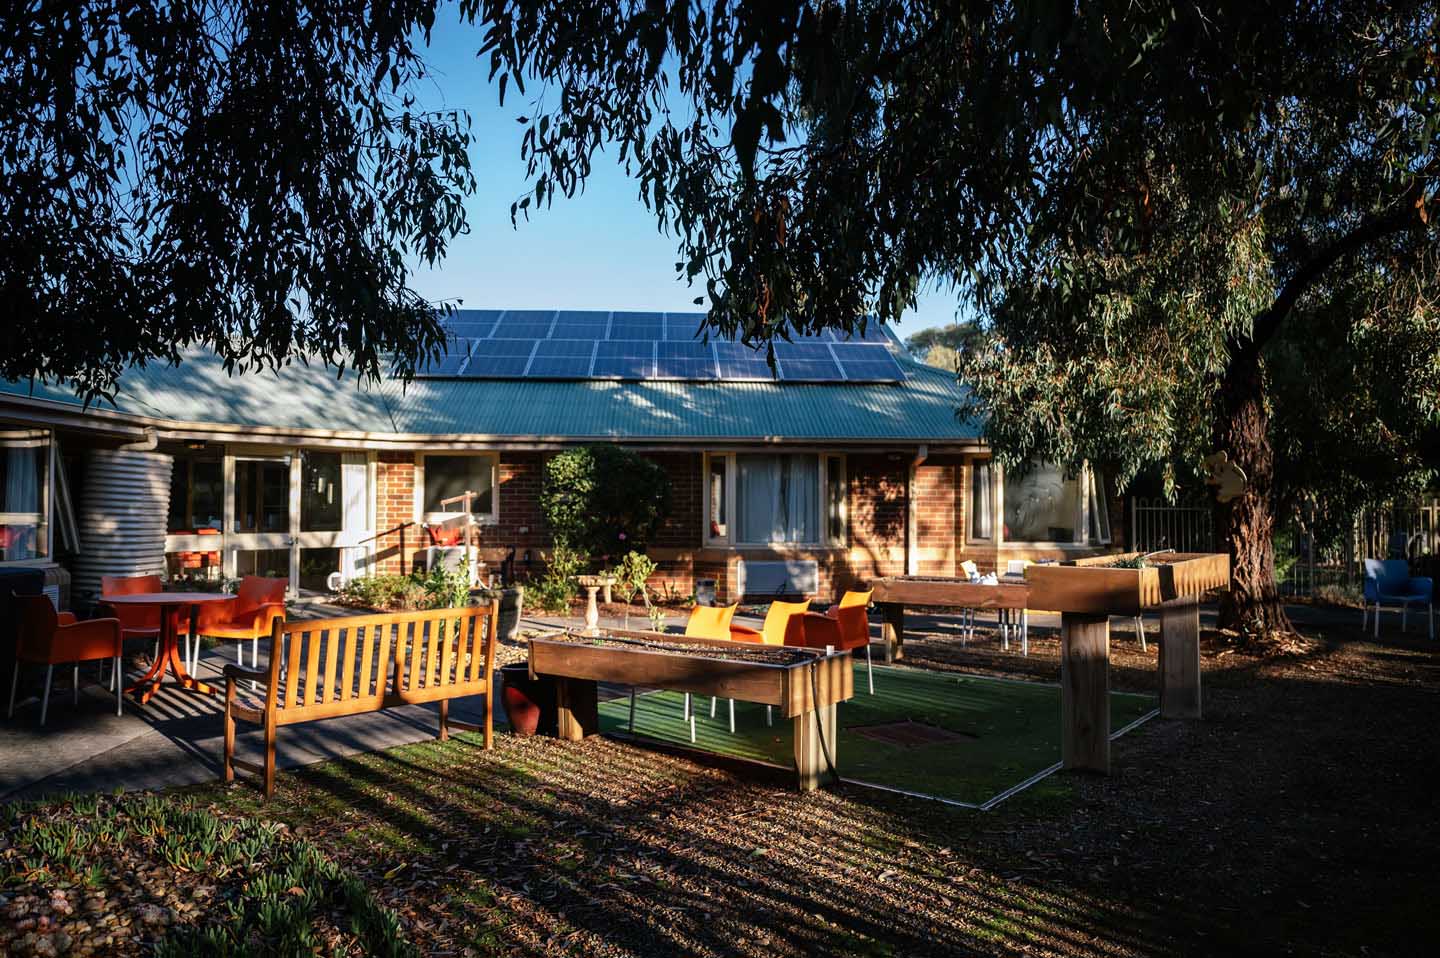 A retirement home with solar panels on the roof.